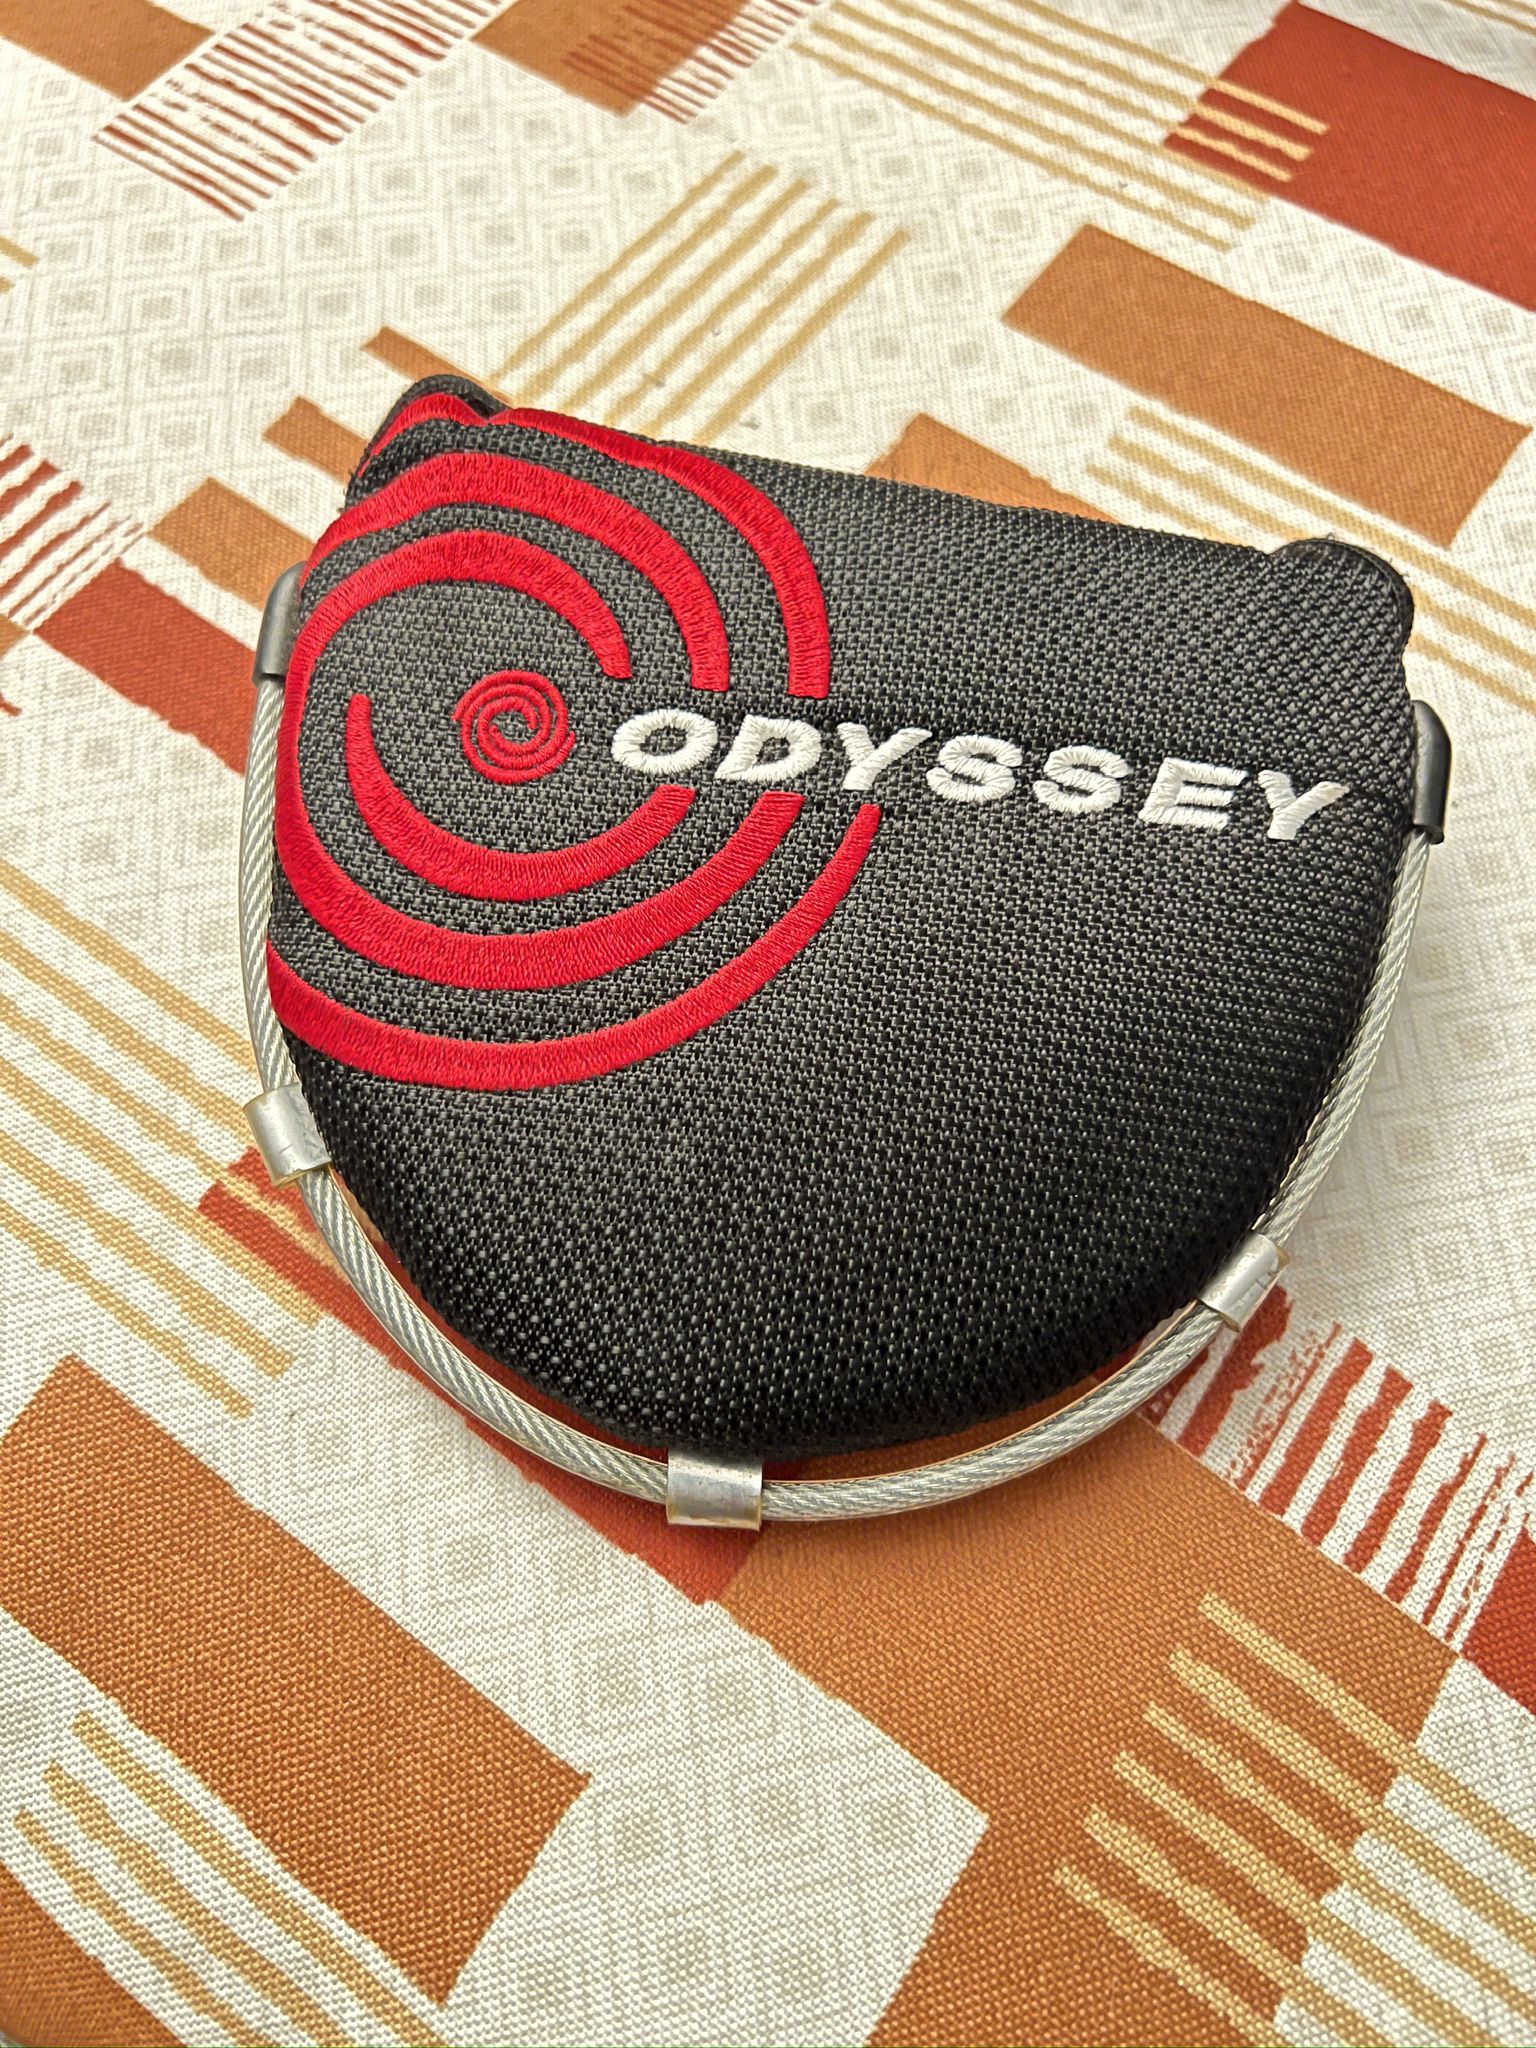 Odessey Putter